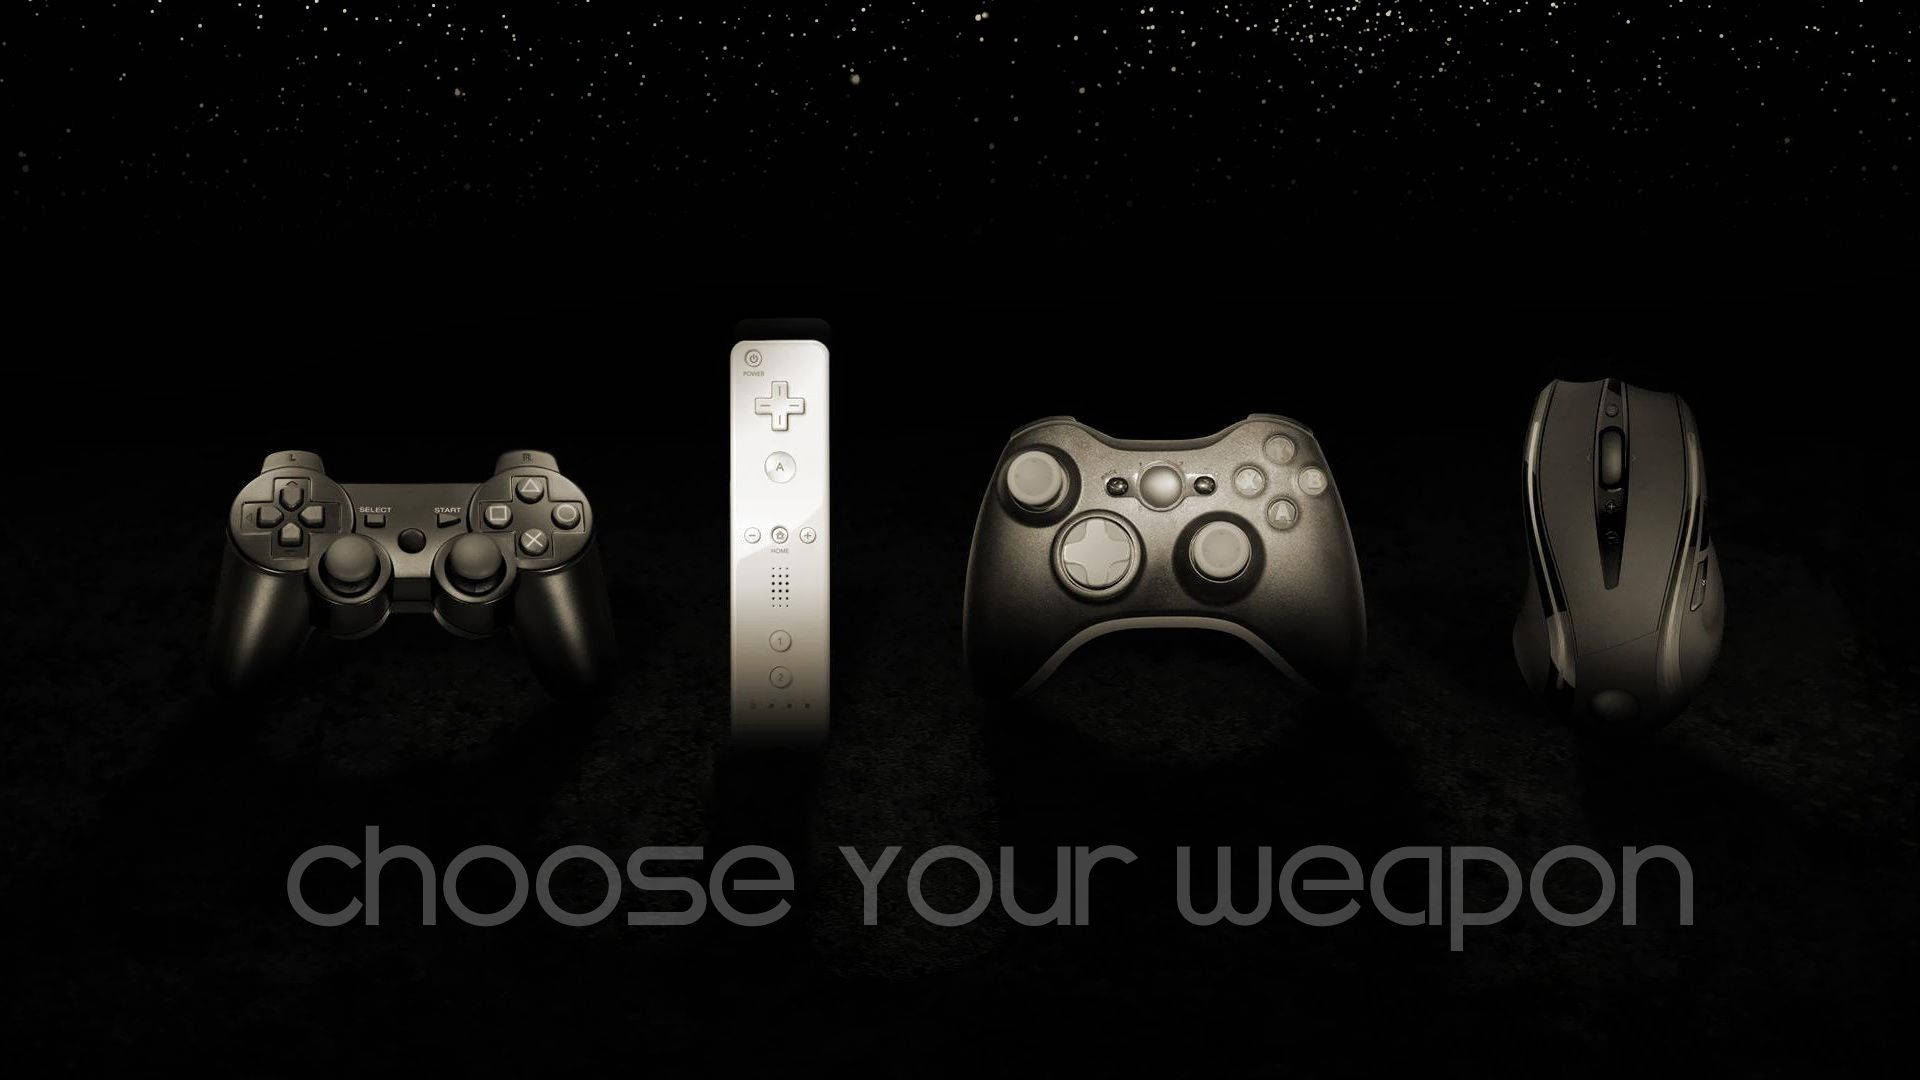 Cool "Choose Your Weapon" Quote For Gaming Desktop Wallpaper